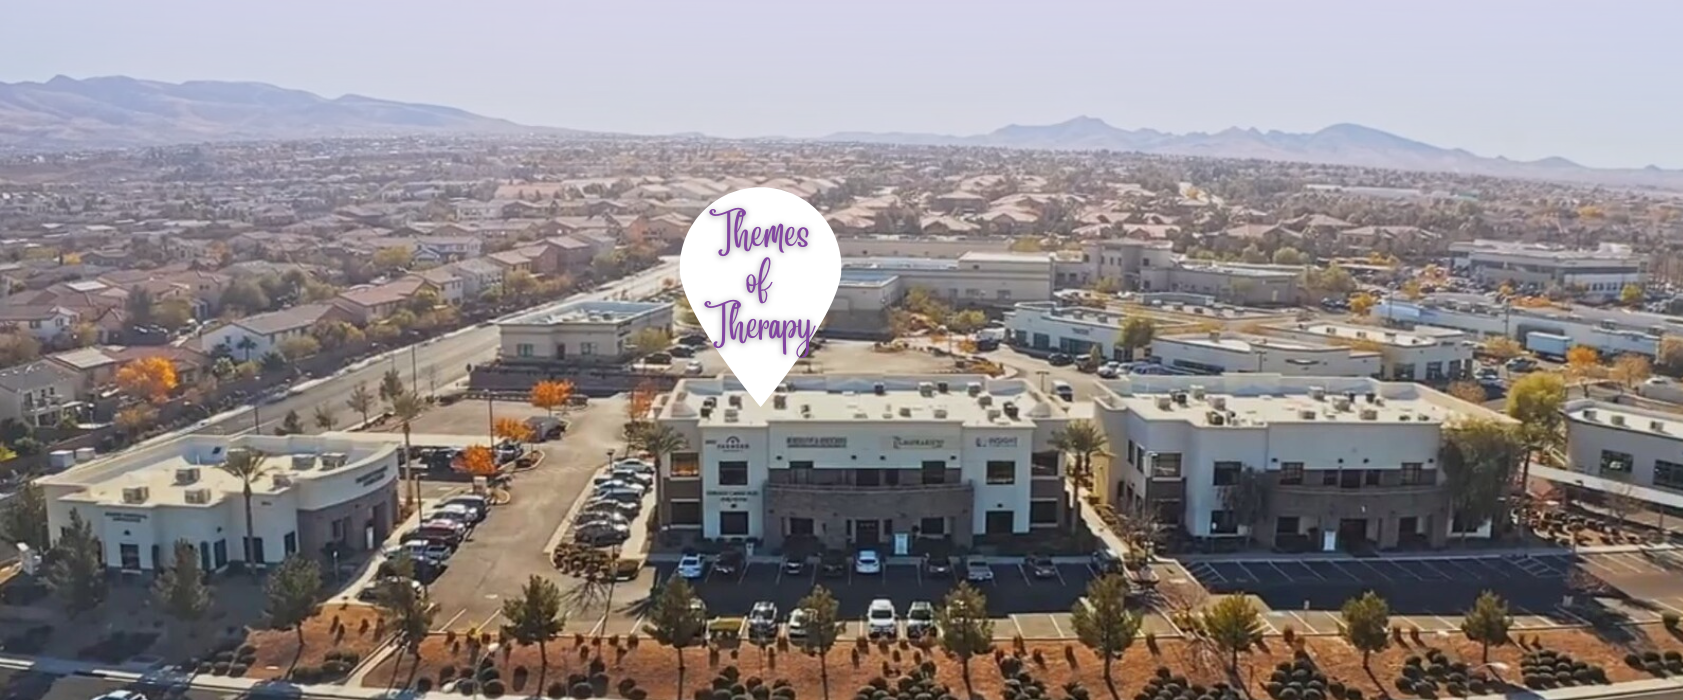 Arial Street view of Themes of Therapy Practice in Henderson Nevada, 89052.